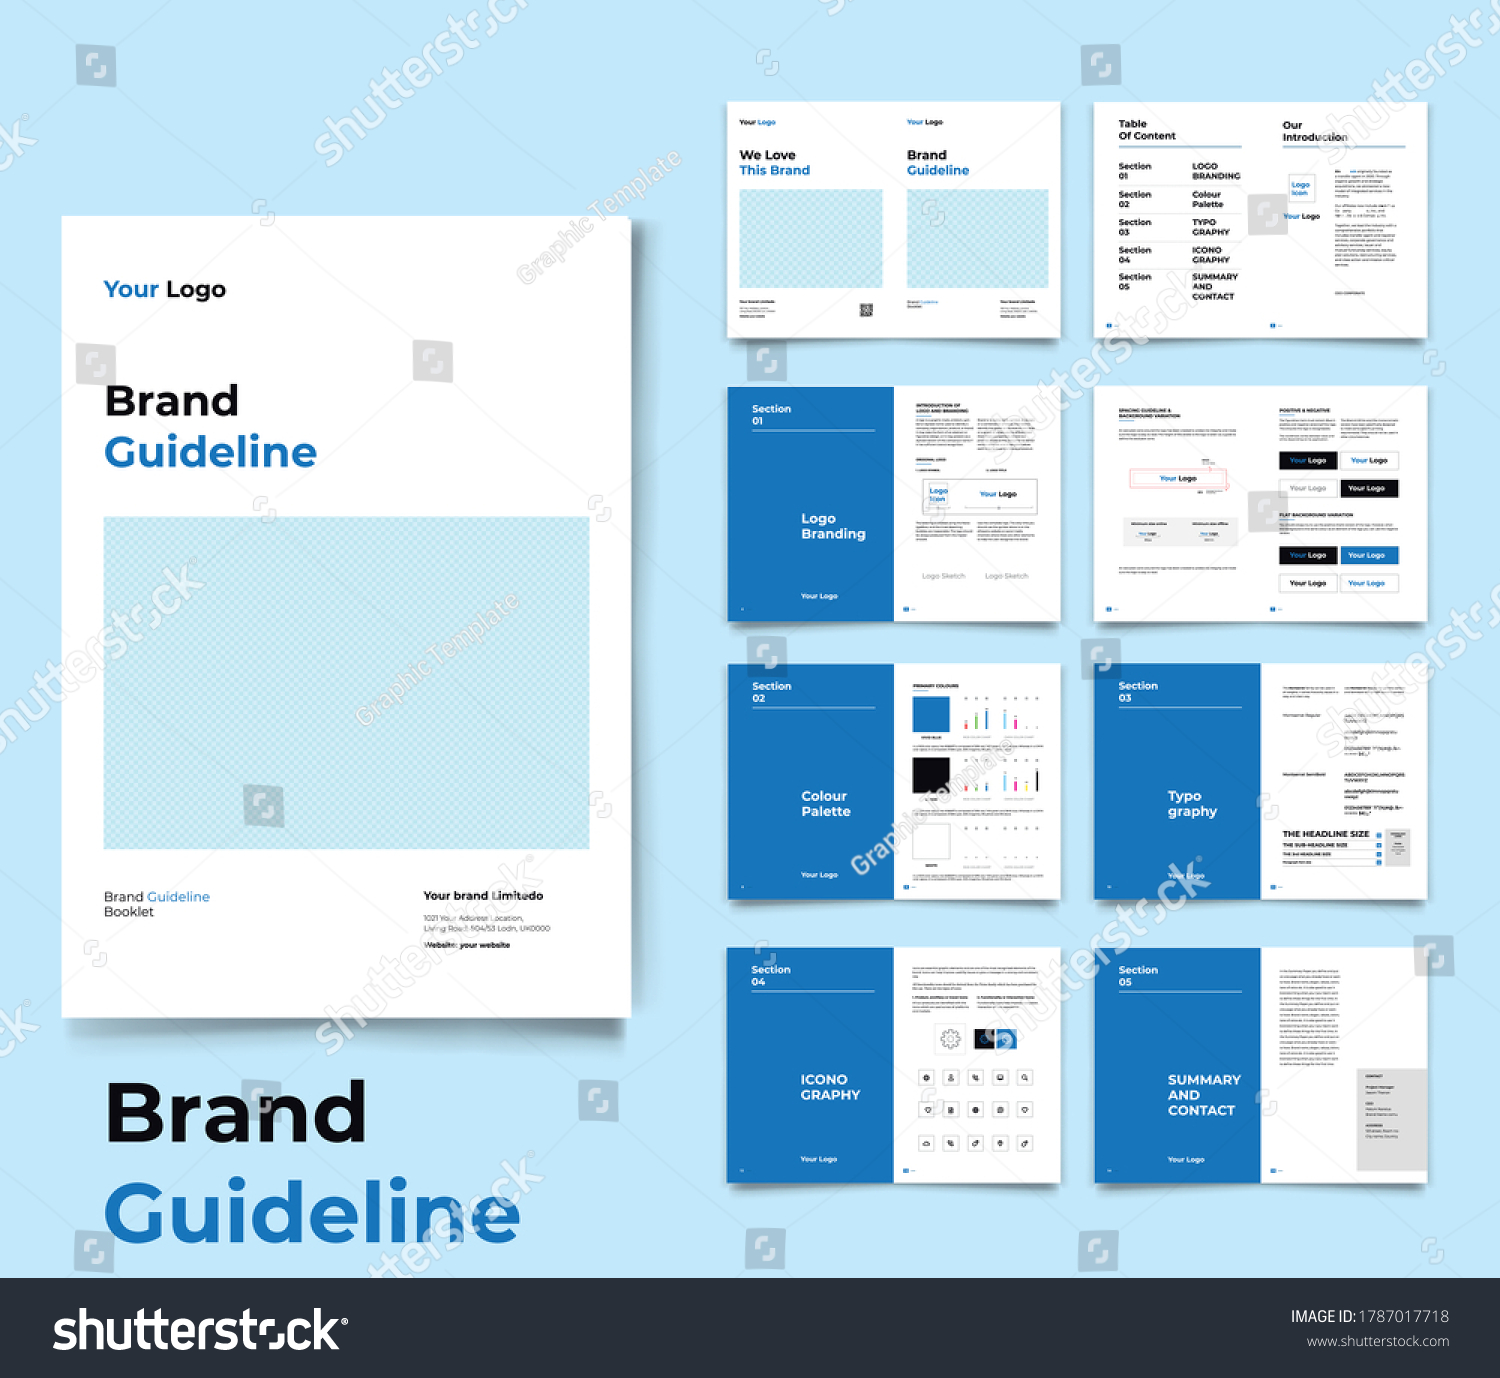 Brand Identity Guideline Template Brand Style Guide Brochure Layout Brand Book Branding Guideline #1787017718